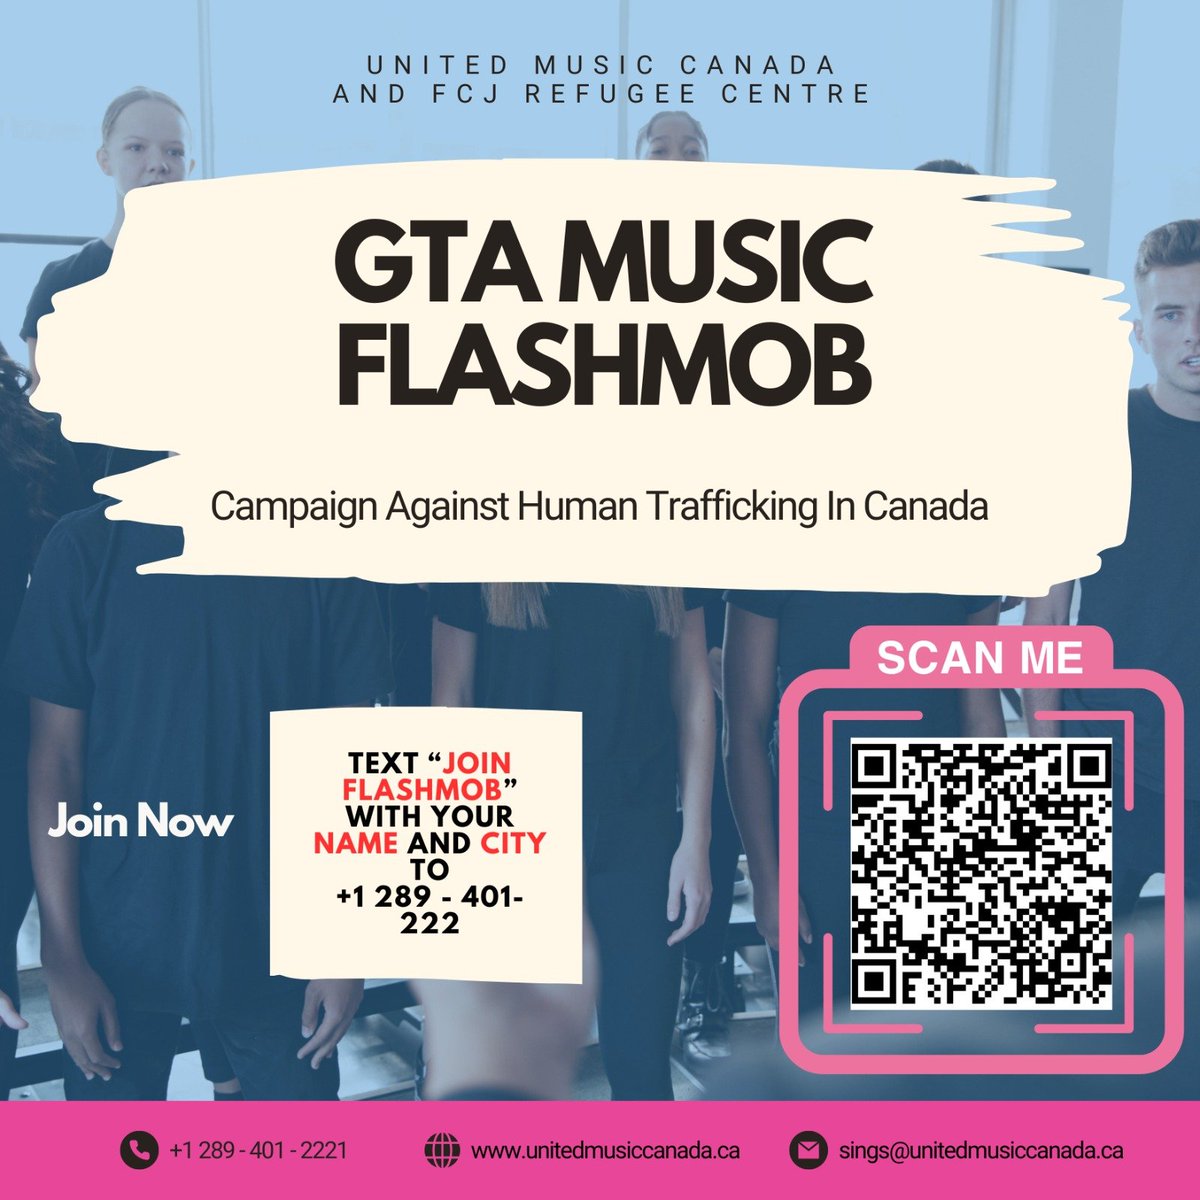 Do you want to be part of an opportunity to advocate through music? FCJ Refugee Centre and United Music Canada are organizing a flash mob to raise awareness about human trafficking in Canada. Scan the code to join! 👇